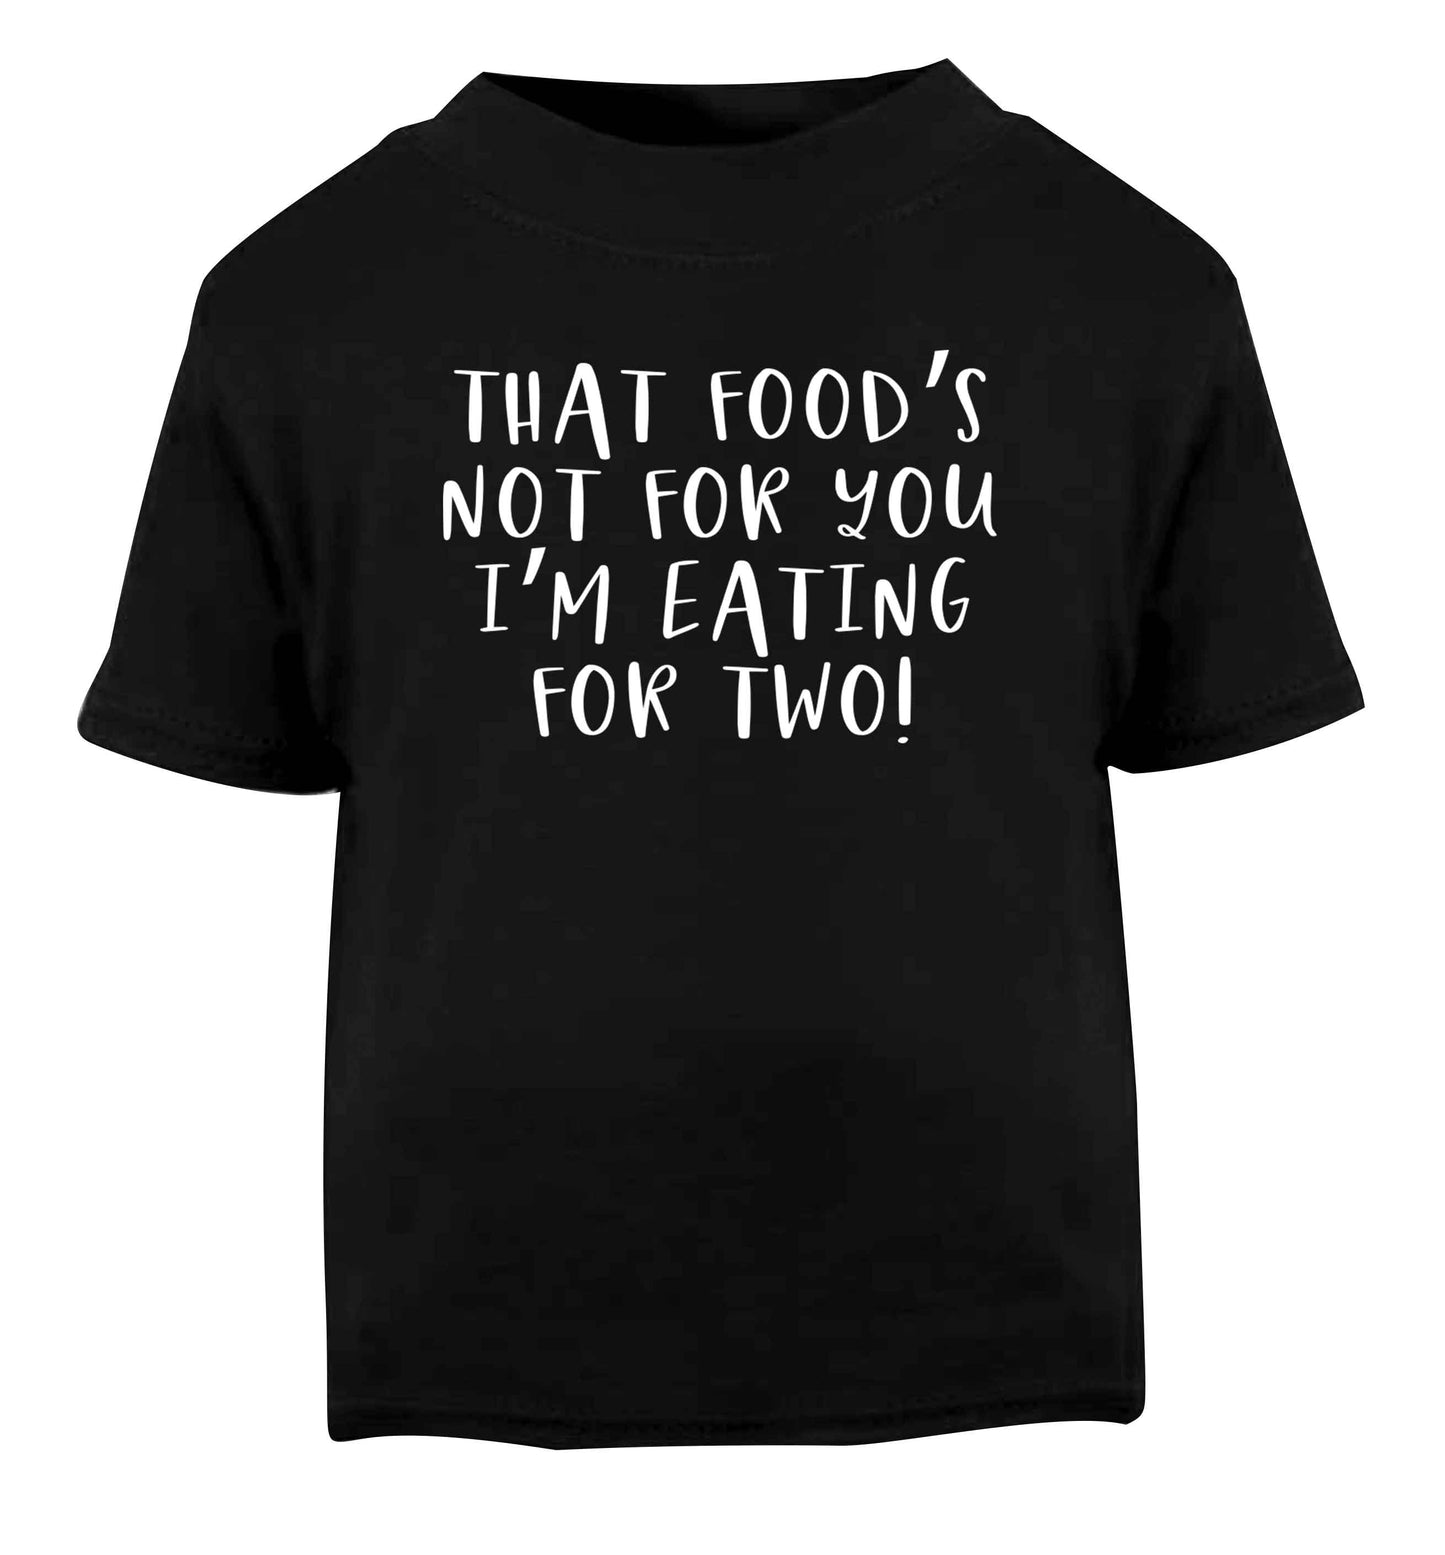 That food's not for you I'm eating for two Black Baby Toddler Tshirt 2 years